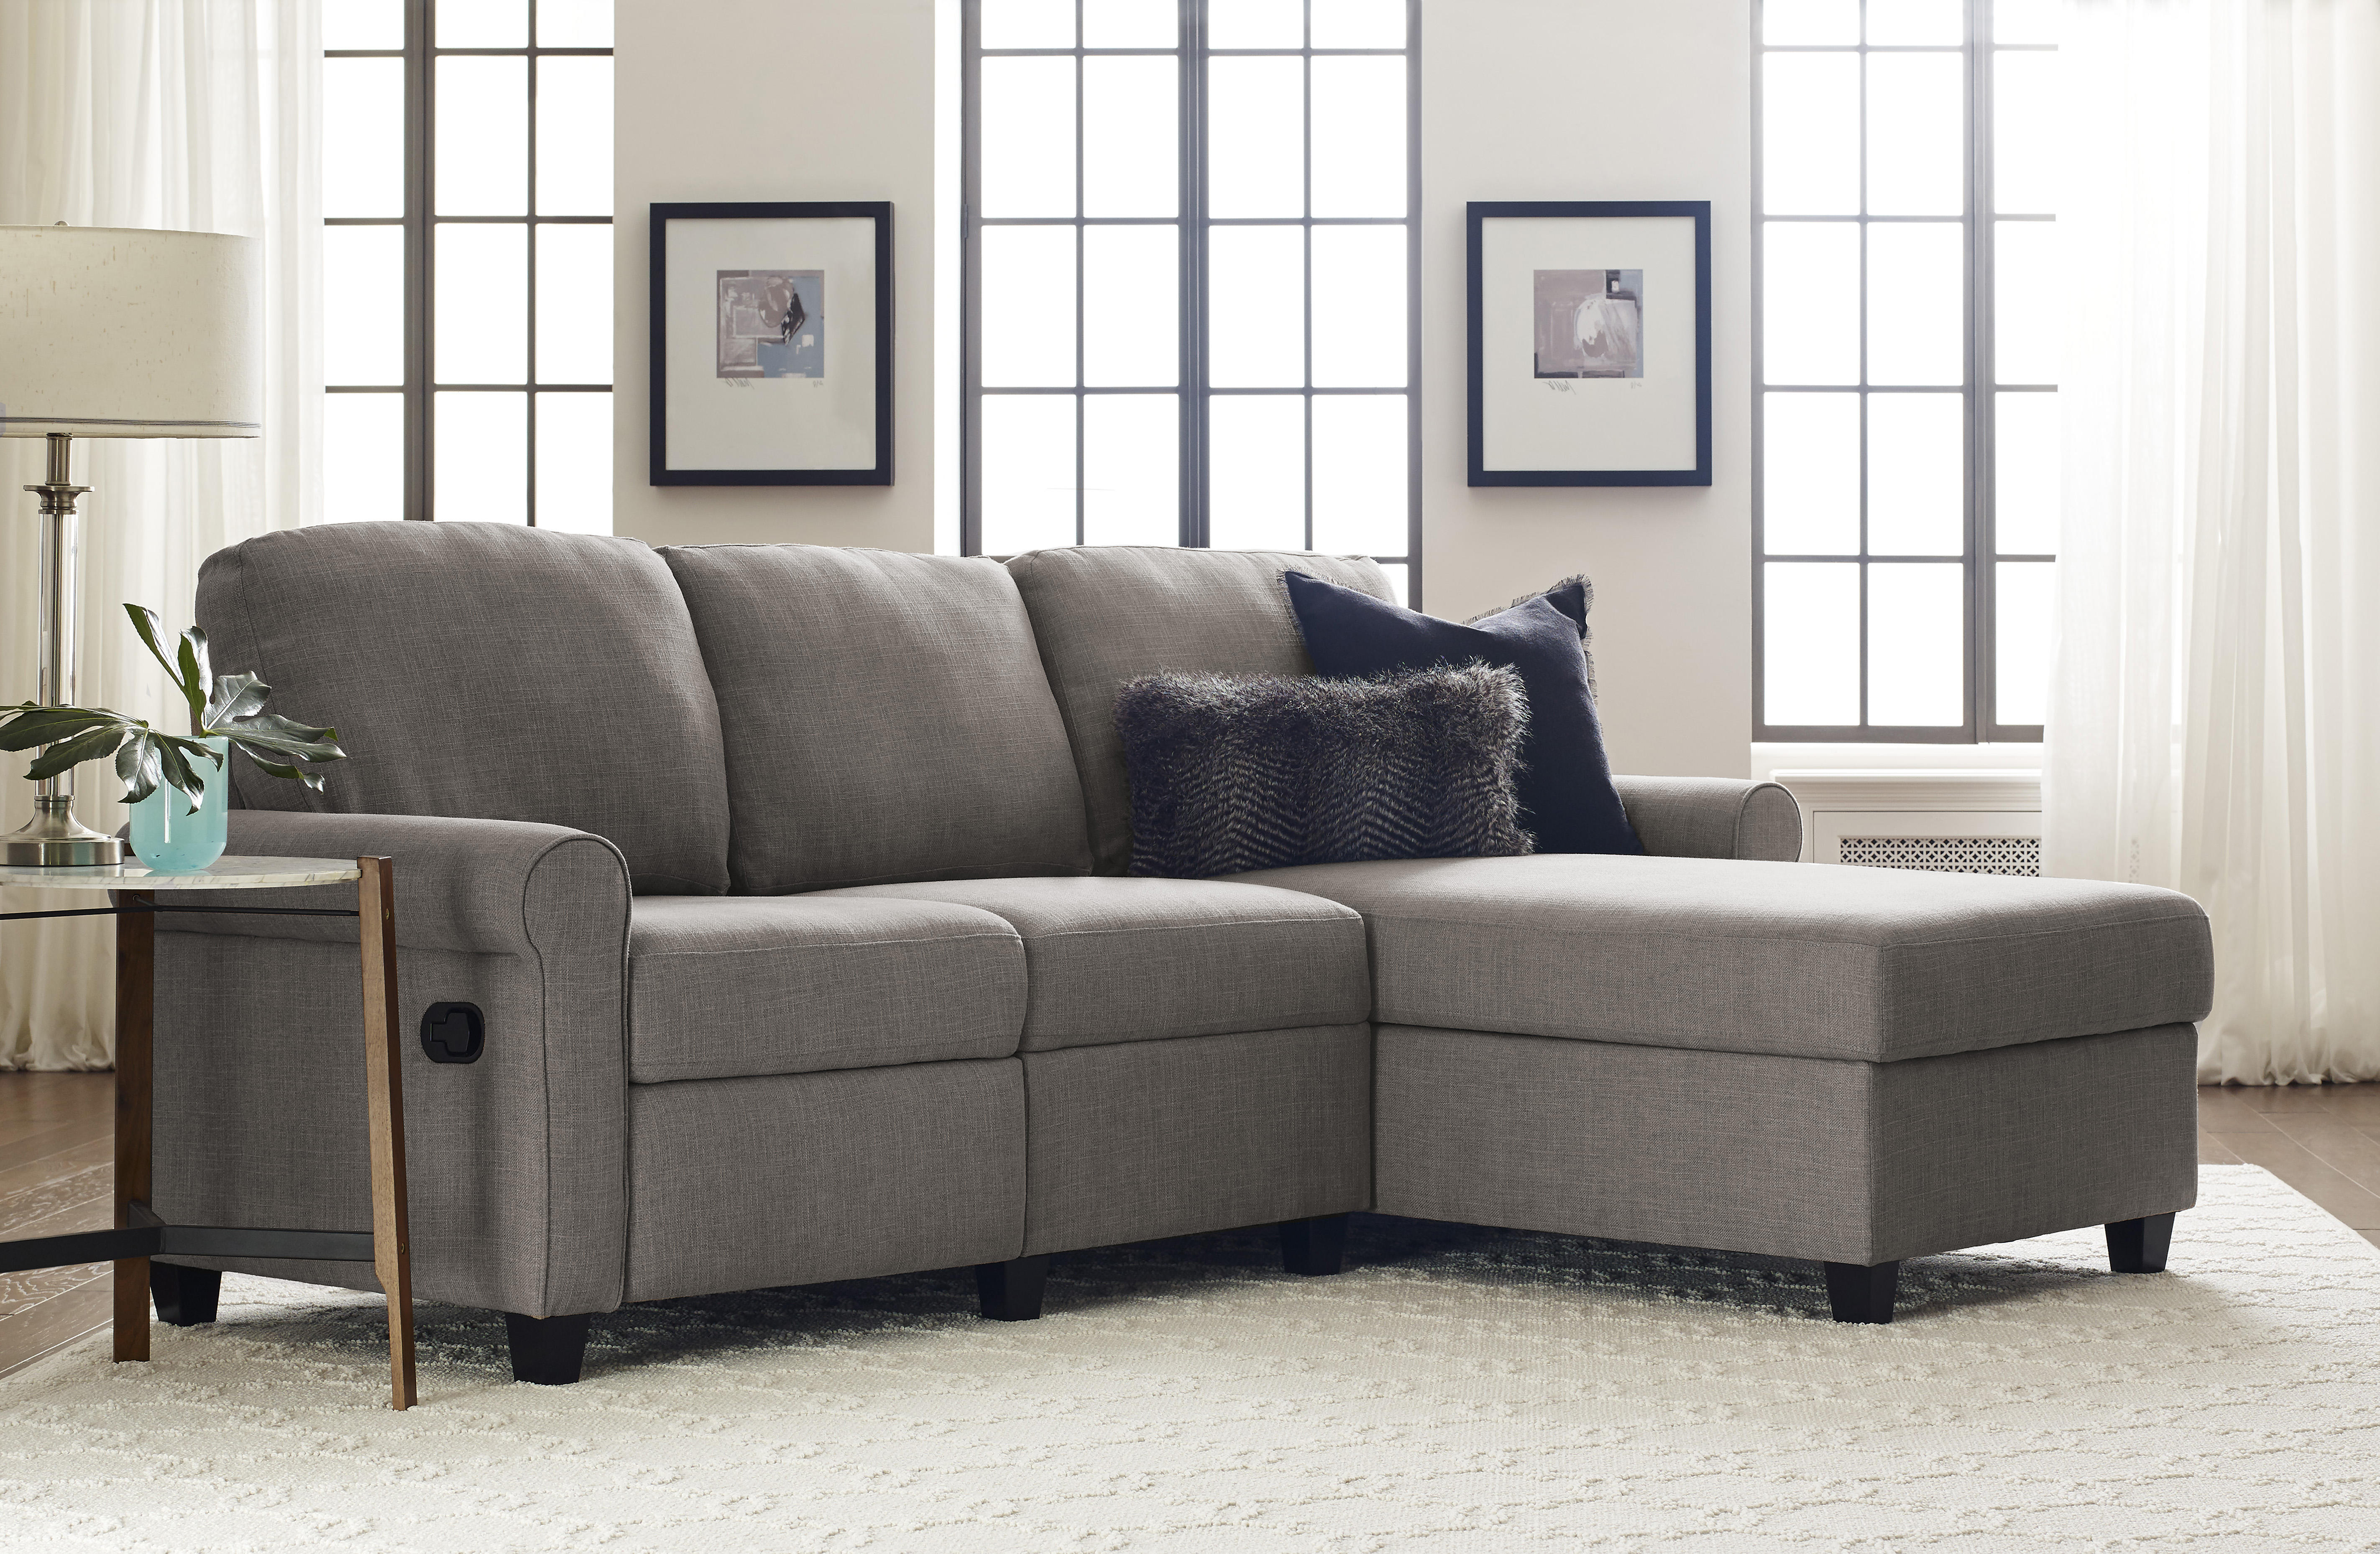 Serta Copenhagen Reclining Sectional with Right Storage Chaise - Gray - image 4 of 10